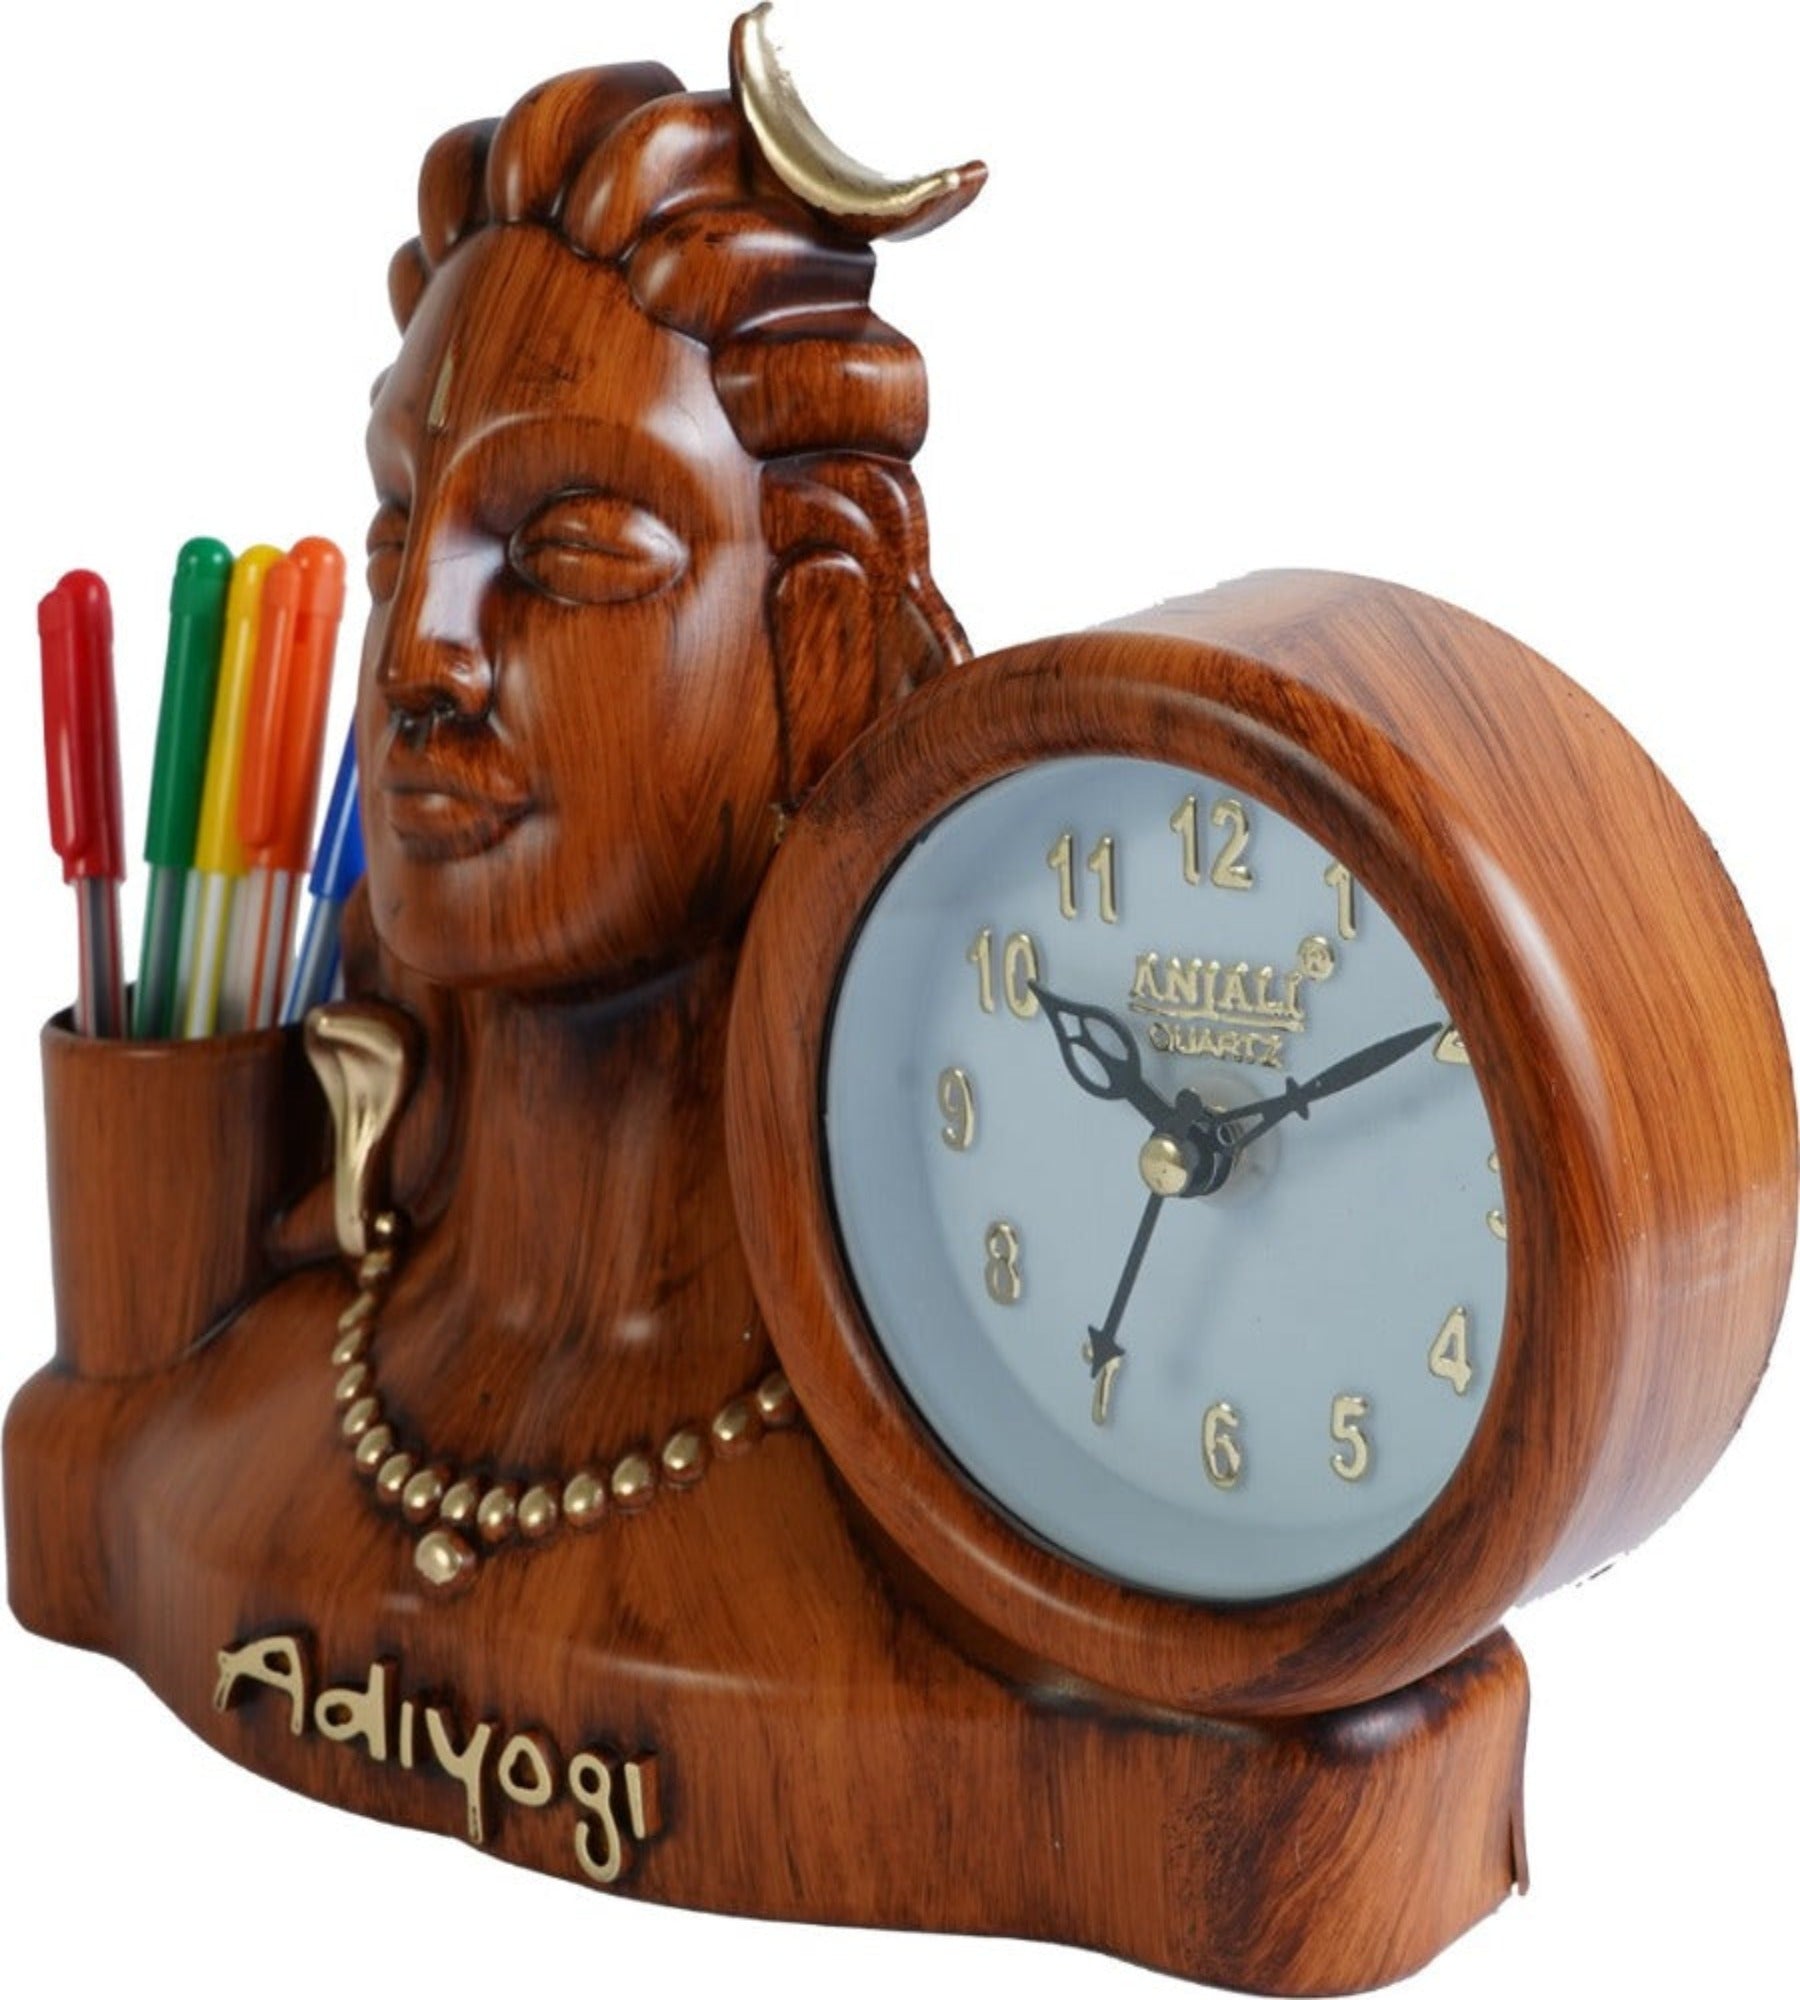 25x20 Cm Adiyogi Table Clock With Penstand For Home Office College K4191